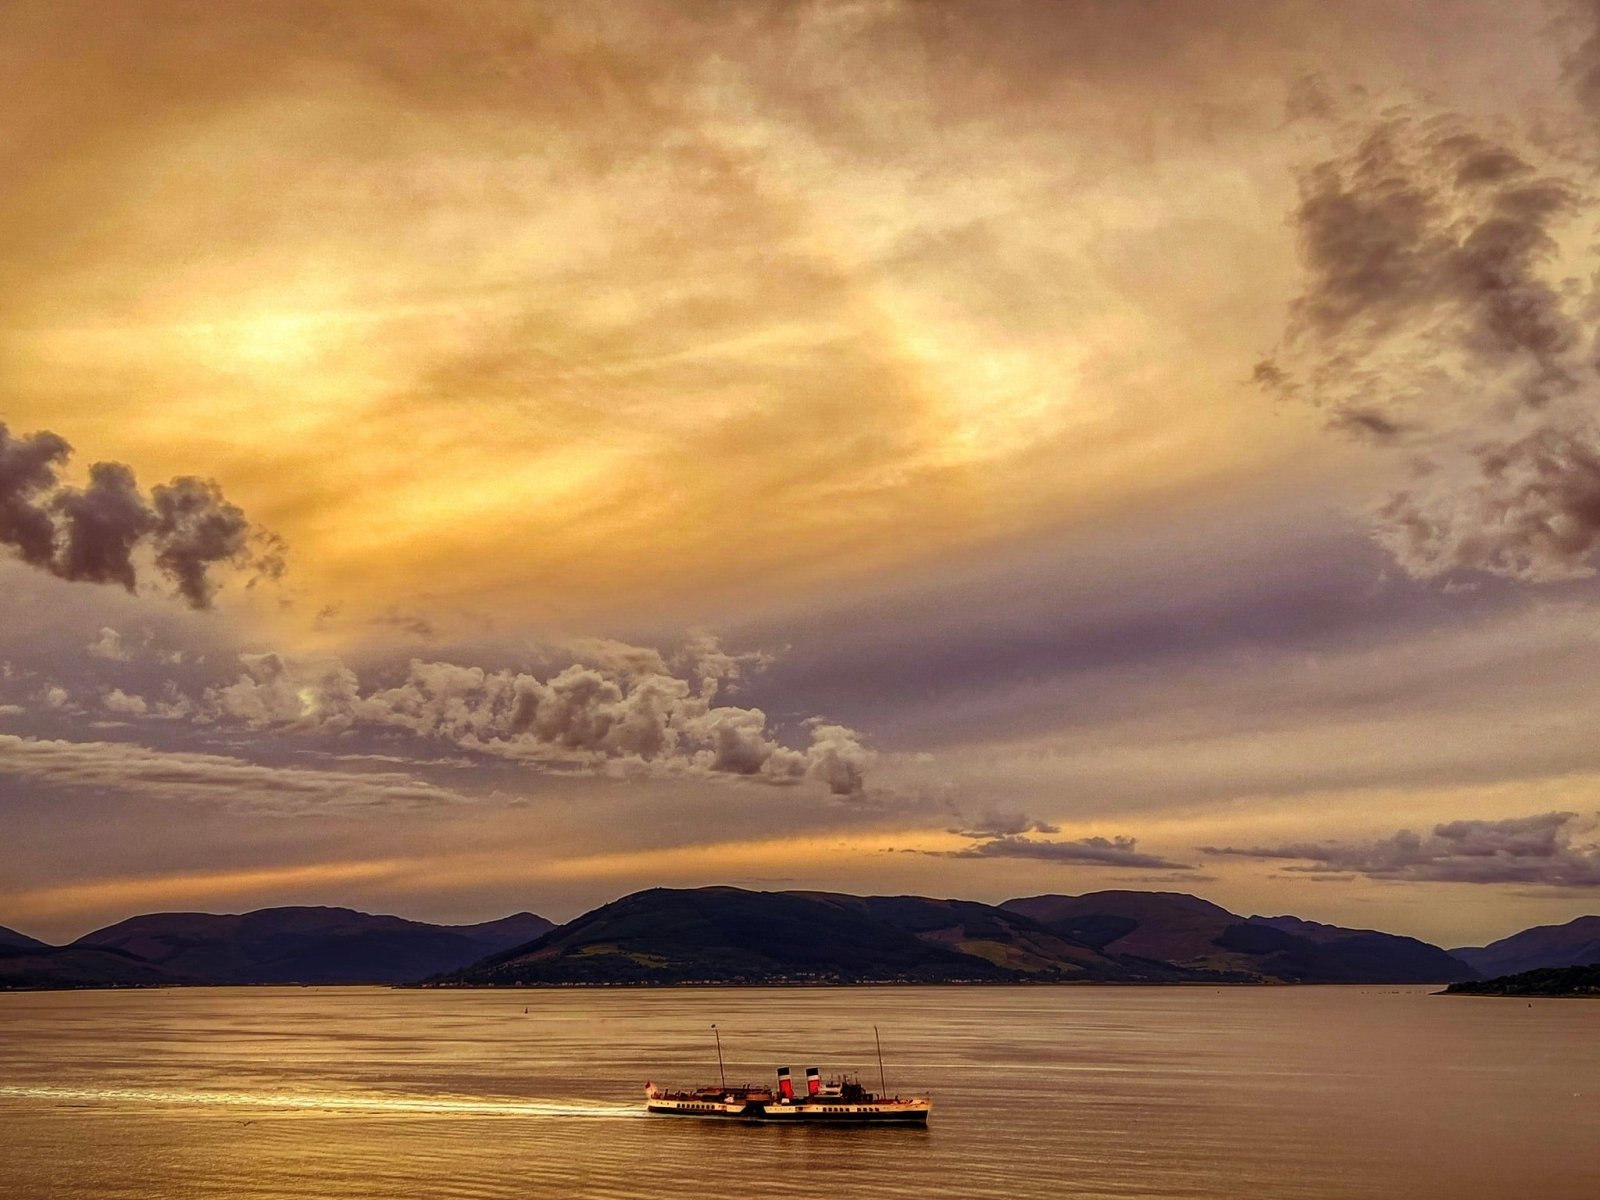 The Waverly Passing Kilcreggan Scottish Landscape Photography-Scottish Landscape Photography-River Clyde Art Gallery-Paintings, Prints, Homeware, Art Gifts From Scotland By Scottish Artist Kevin Hunter